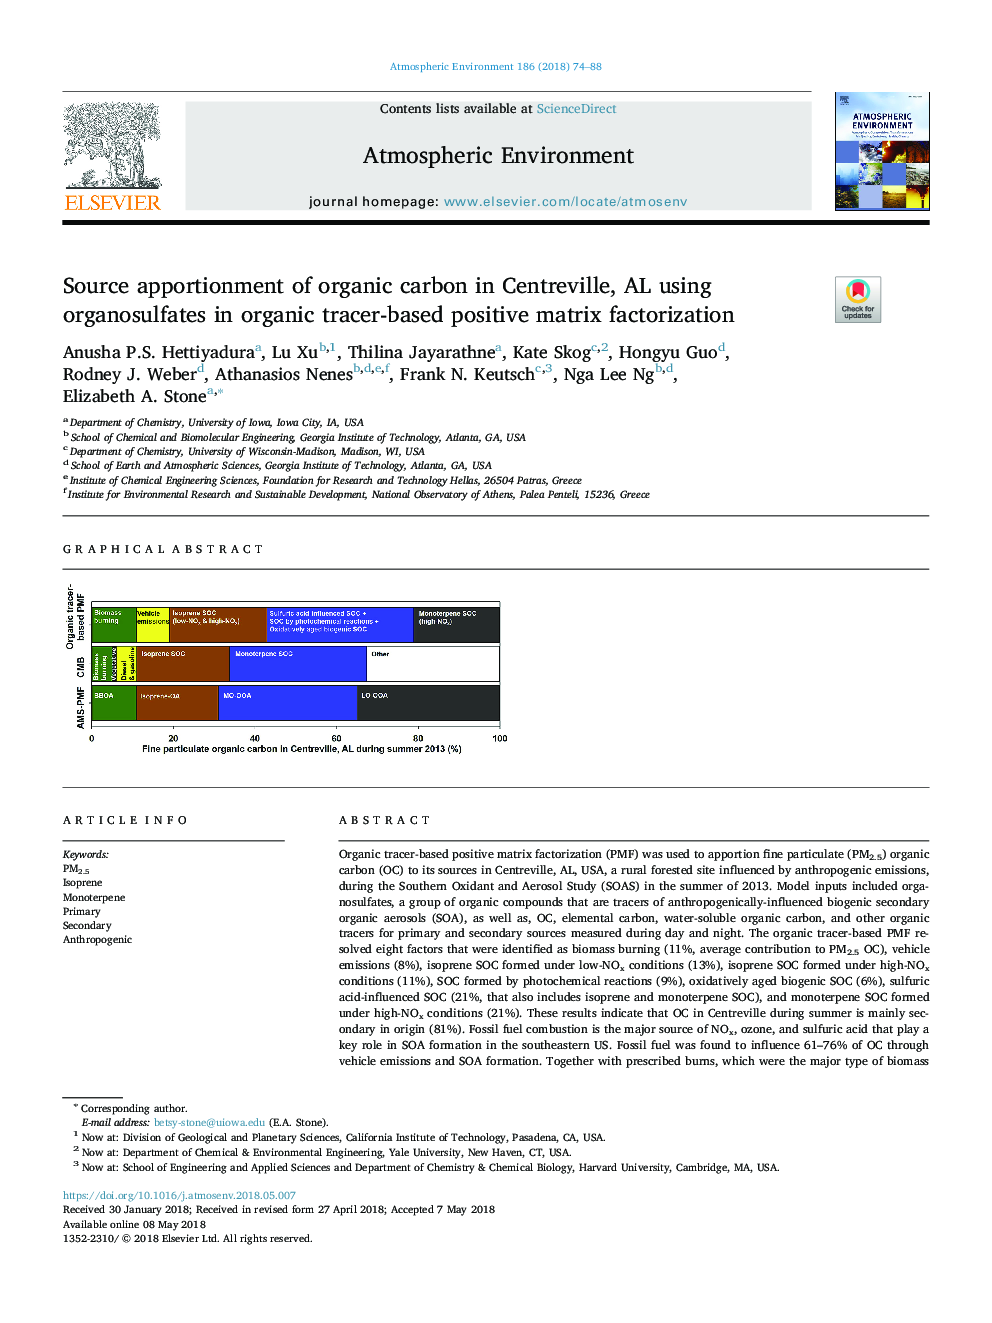 Source apportionment of organic carbon in Centreville, AL using organosulfates in organic tracer-based positive matrix factorization